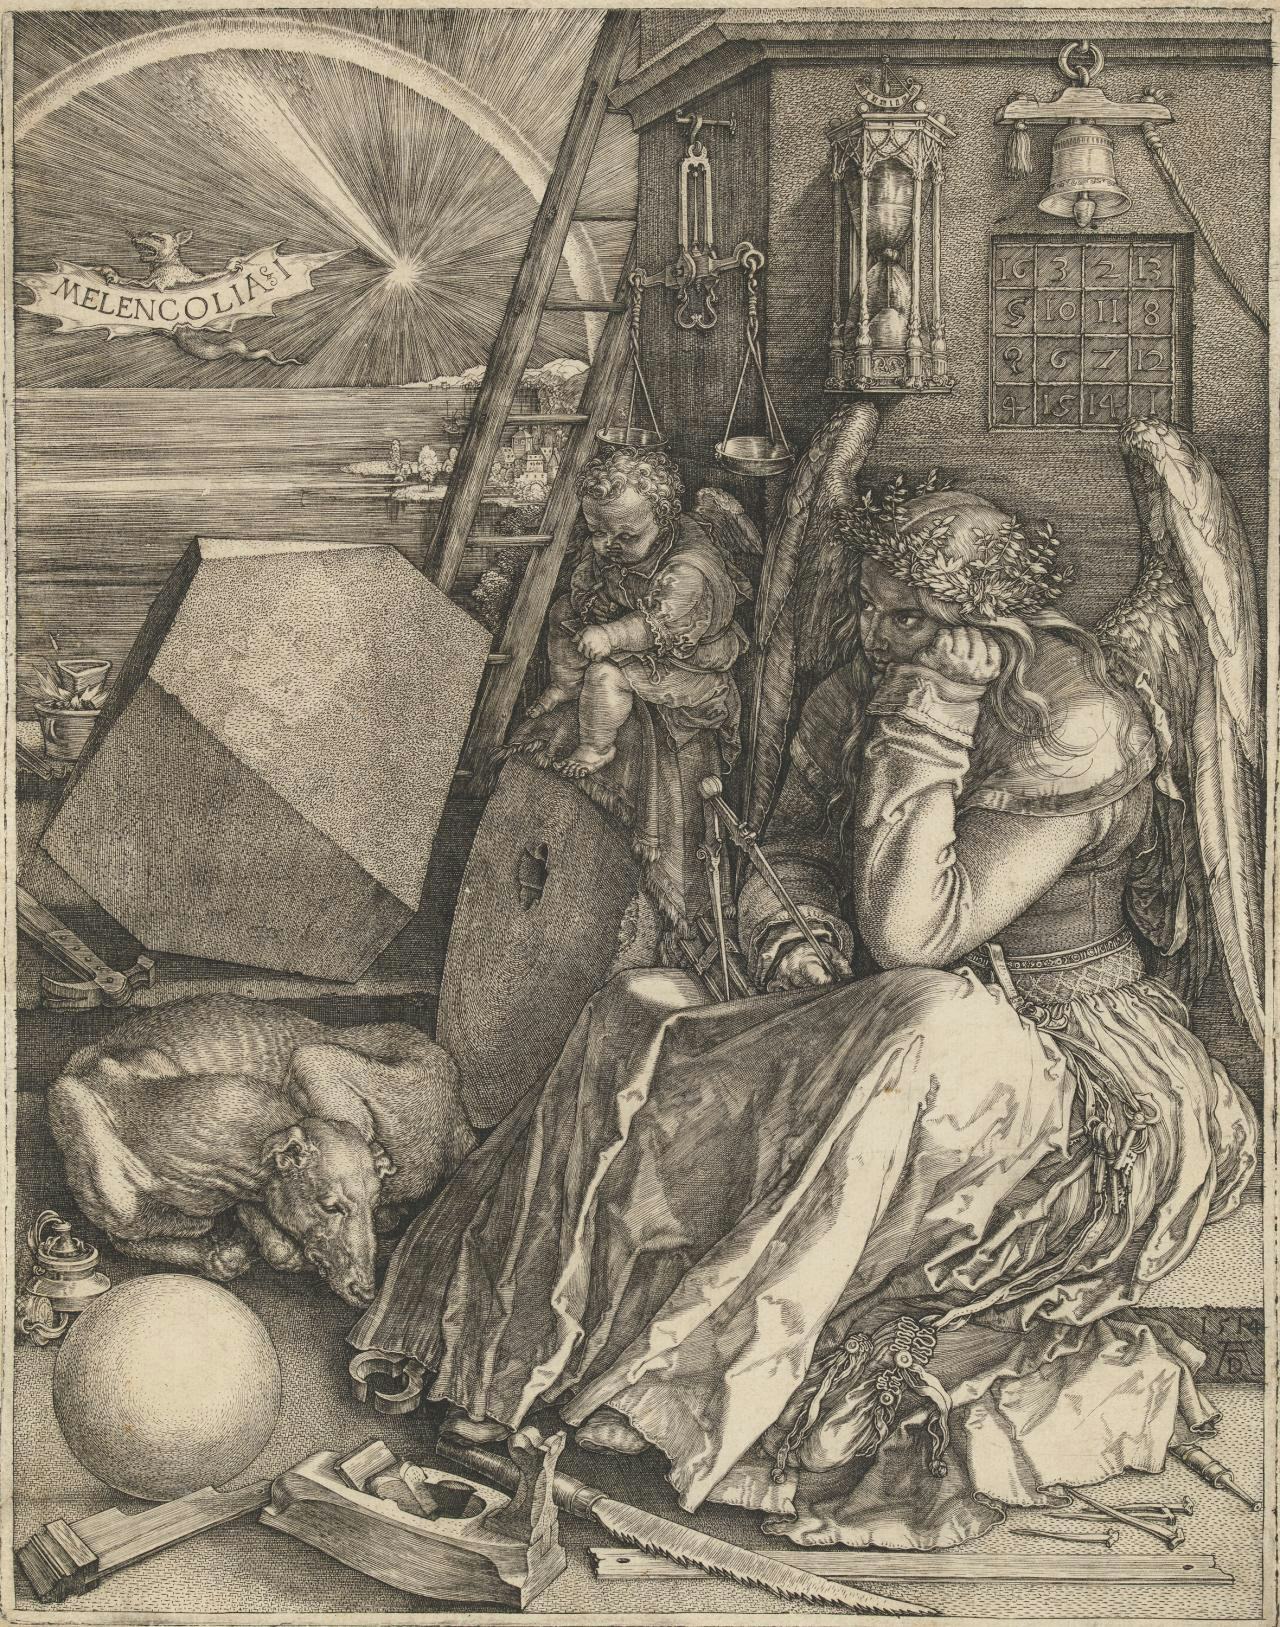  The artwork ‘Melencolia I’, a 1514 engraving by the German Renaissance artist Albrecht Dürer. ‘A sixteenth-century interpretation of daydreaming, showing a melancholic, brooding figure lost in thought.’ 